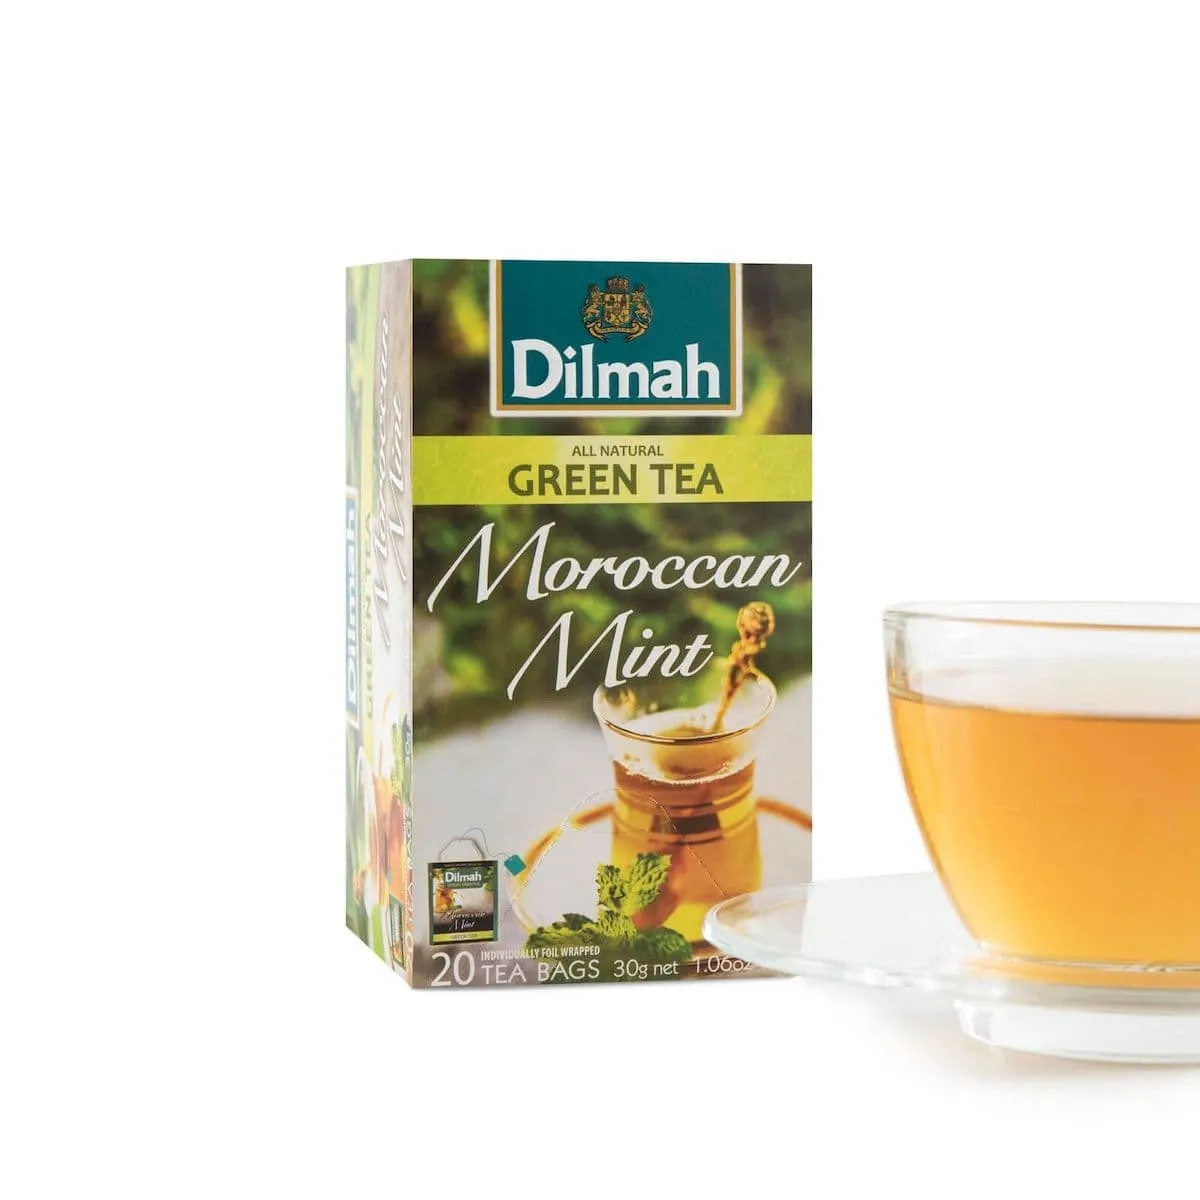 Pack of Moroccan Mint green tea with a cup of this tea